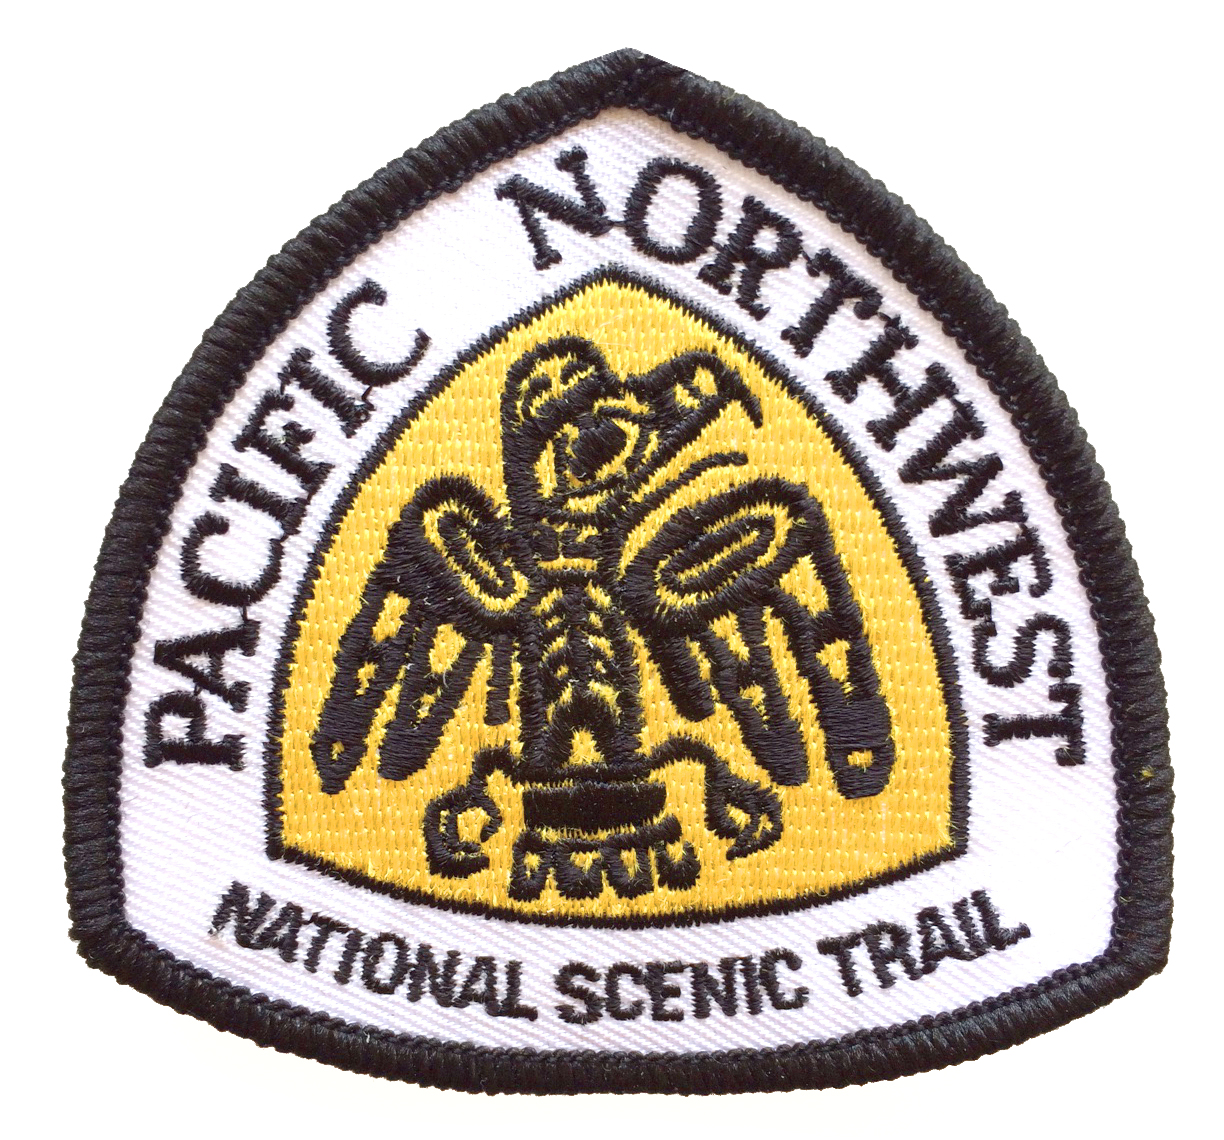 Pacific Northwest Trail Patch